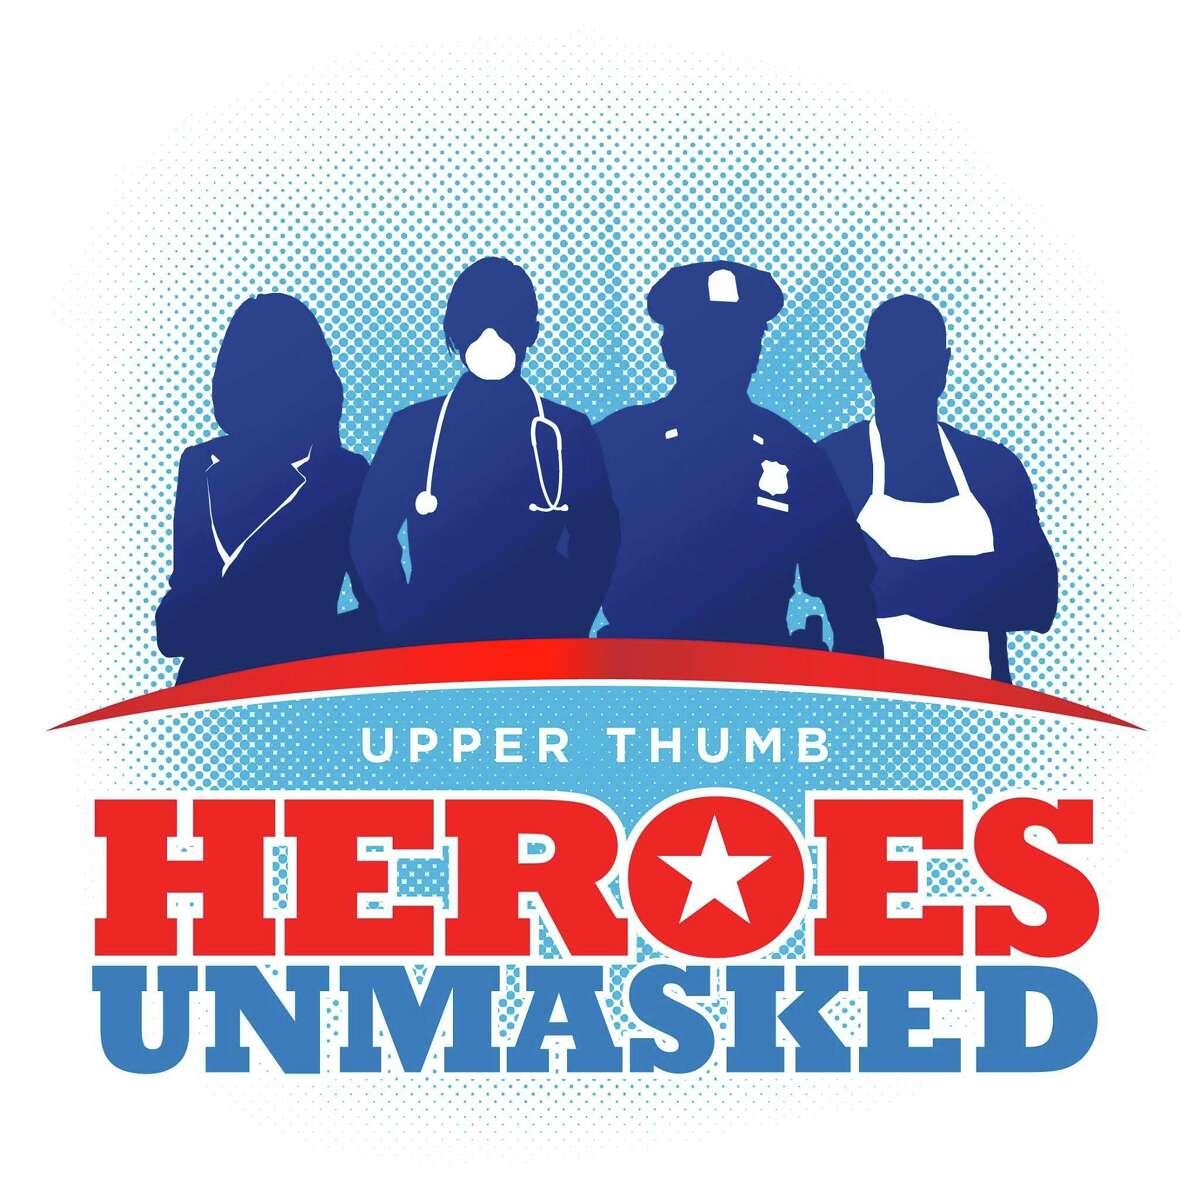 LOOKING FOR HEROES Do you know someone who's been a community hero during the coronavirus pandemic? The Tribune wants to shine a light on everyday people doing great things during this crisis.If you know someone, send a note to eric.young@hearstnp.com or scott.nunn@hearstnp.com to say who they are and what they have been doing.